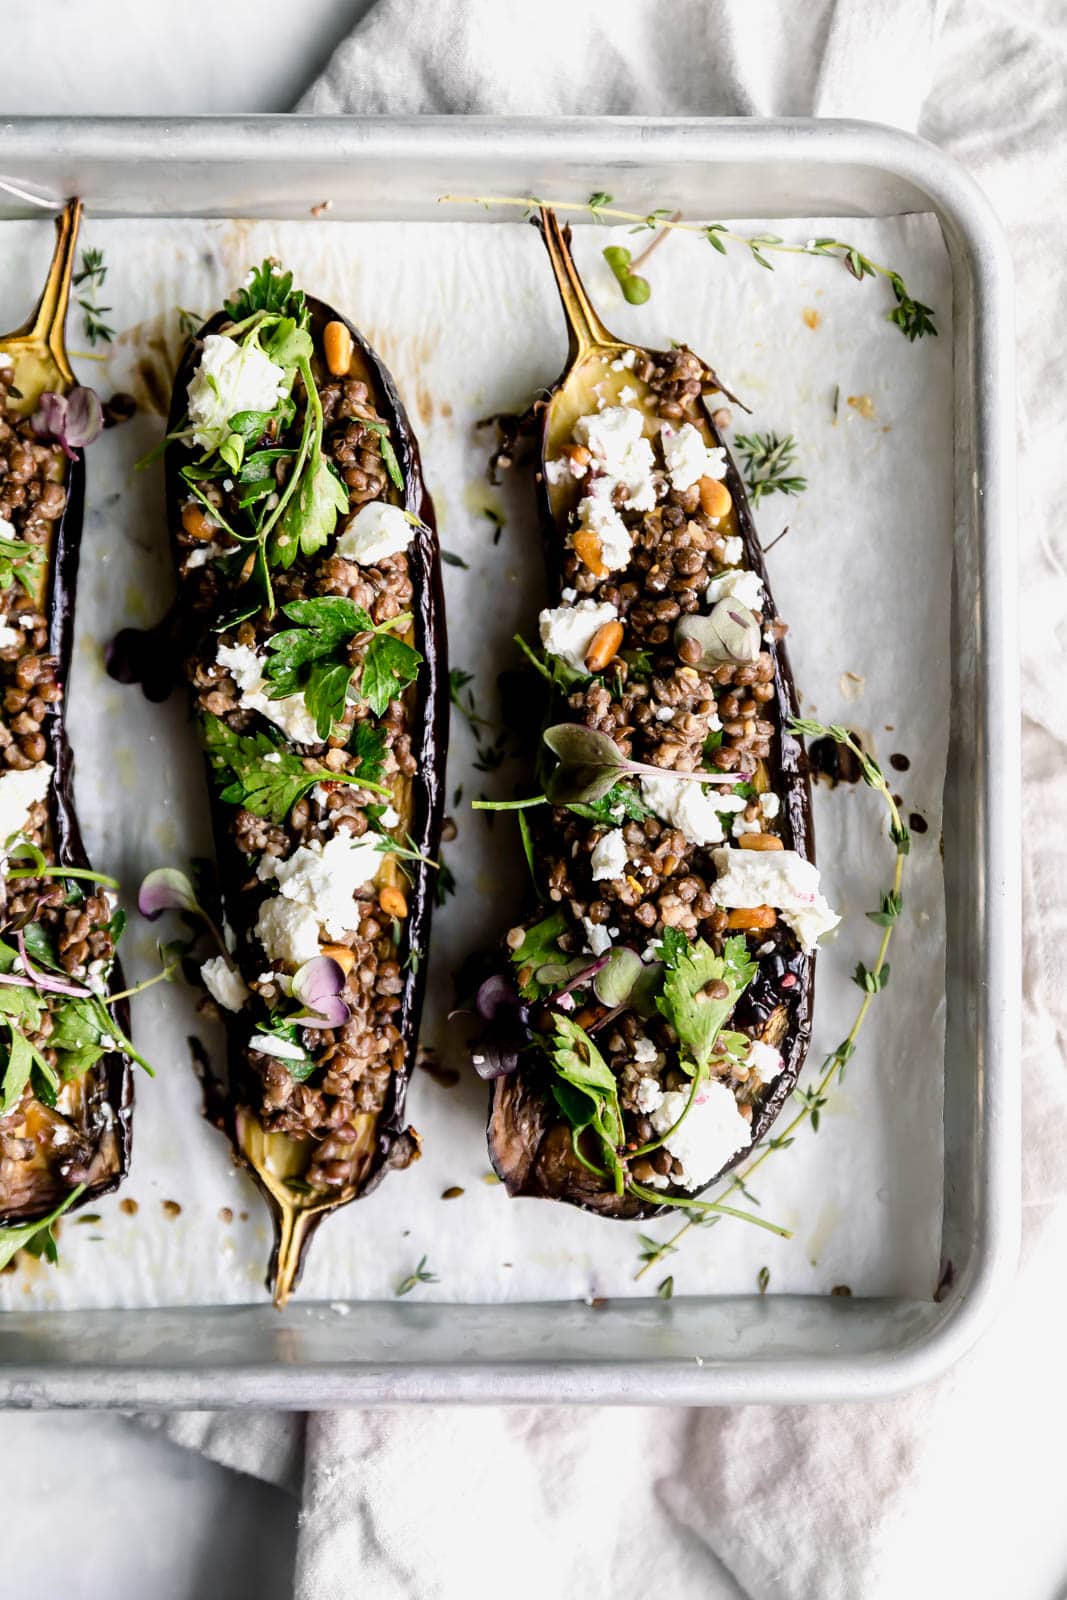 Oven Roasted Eggplant With Goat Cheese